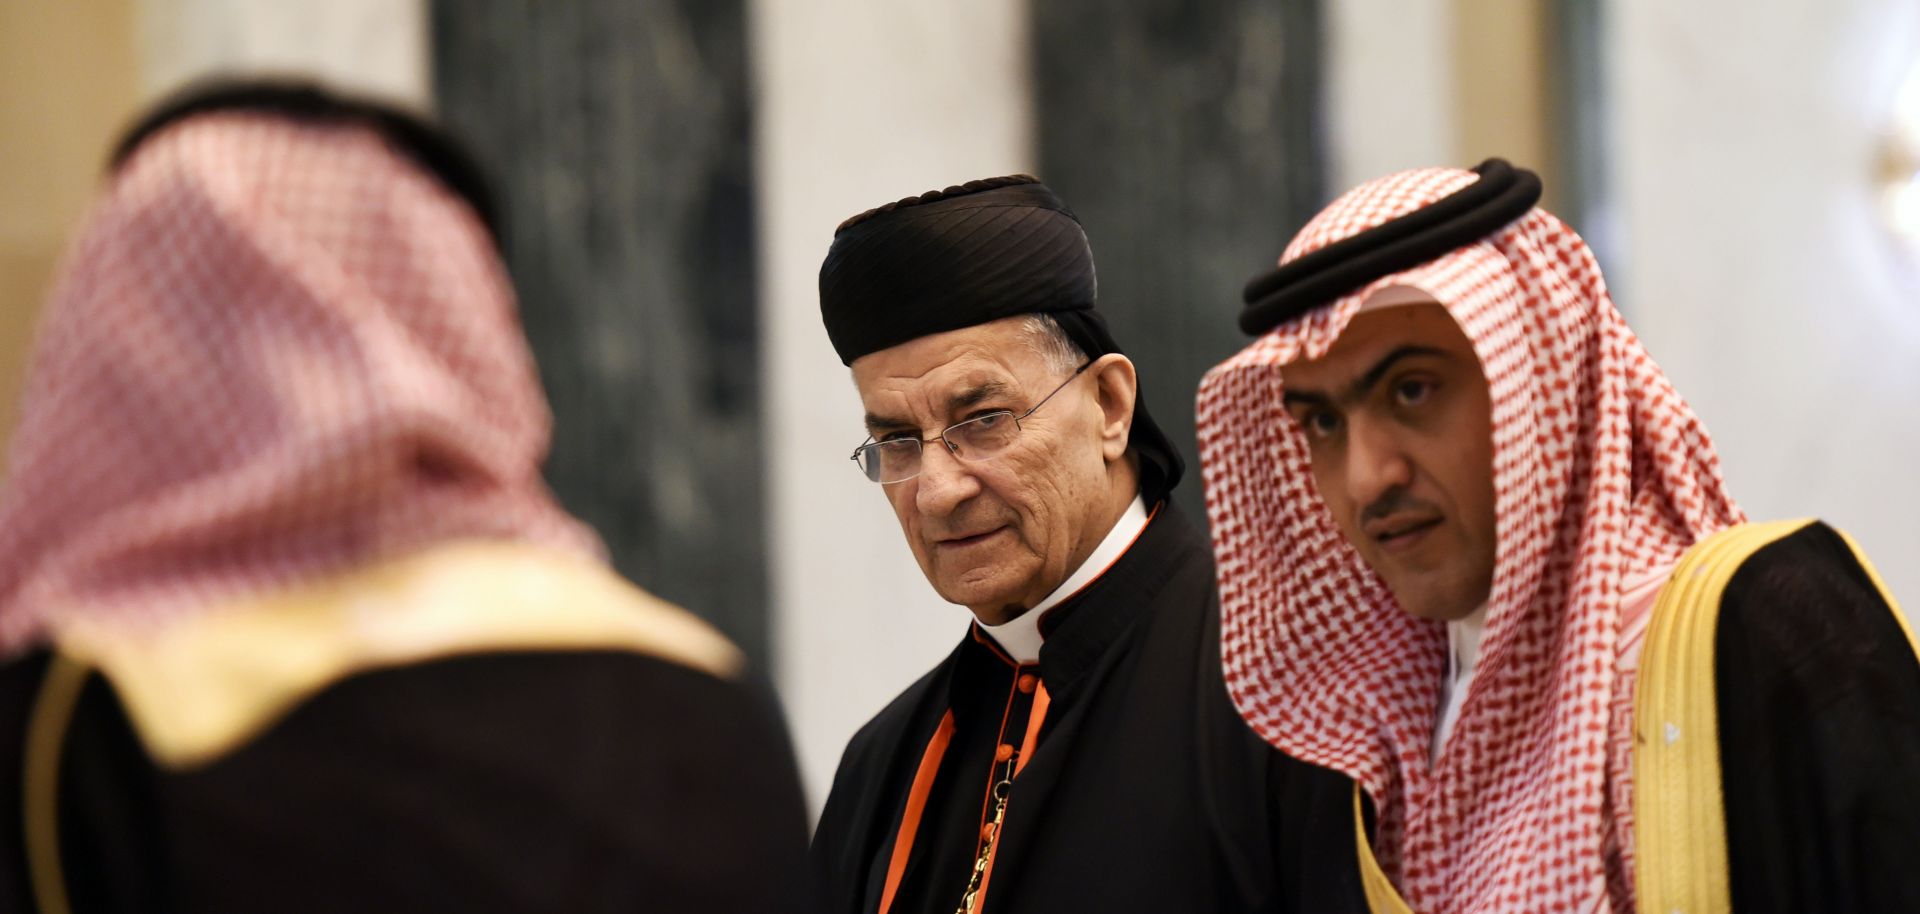 Lebanon's Christian Maronite Patriarch Beshara Rai (C) arrives for a historic first-time meeting with the Saudi crown prince on Nov. 14, 2017, in Riyadh.